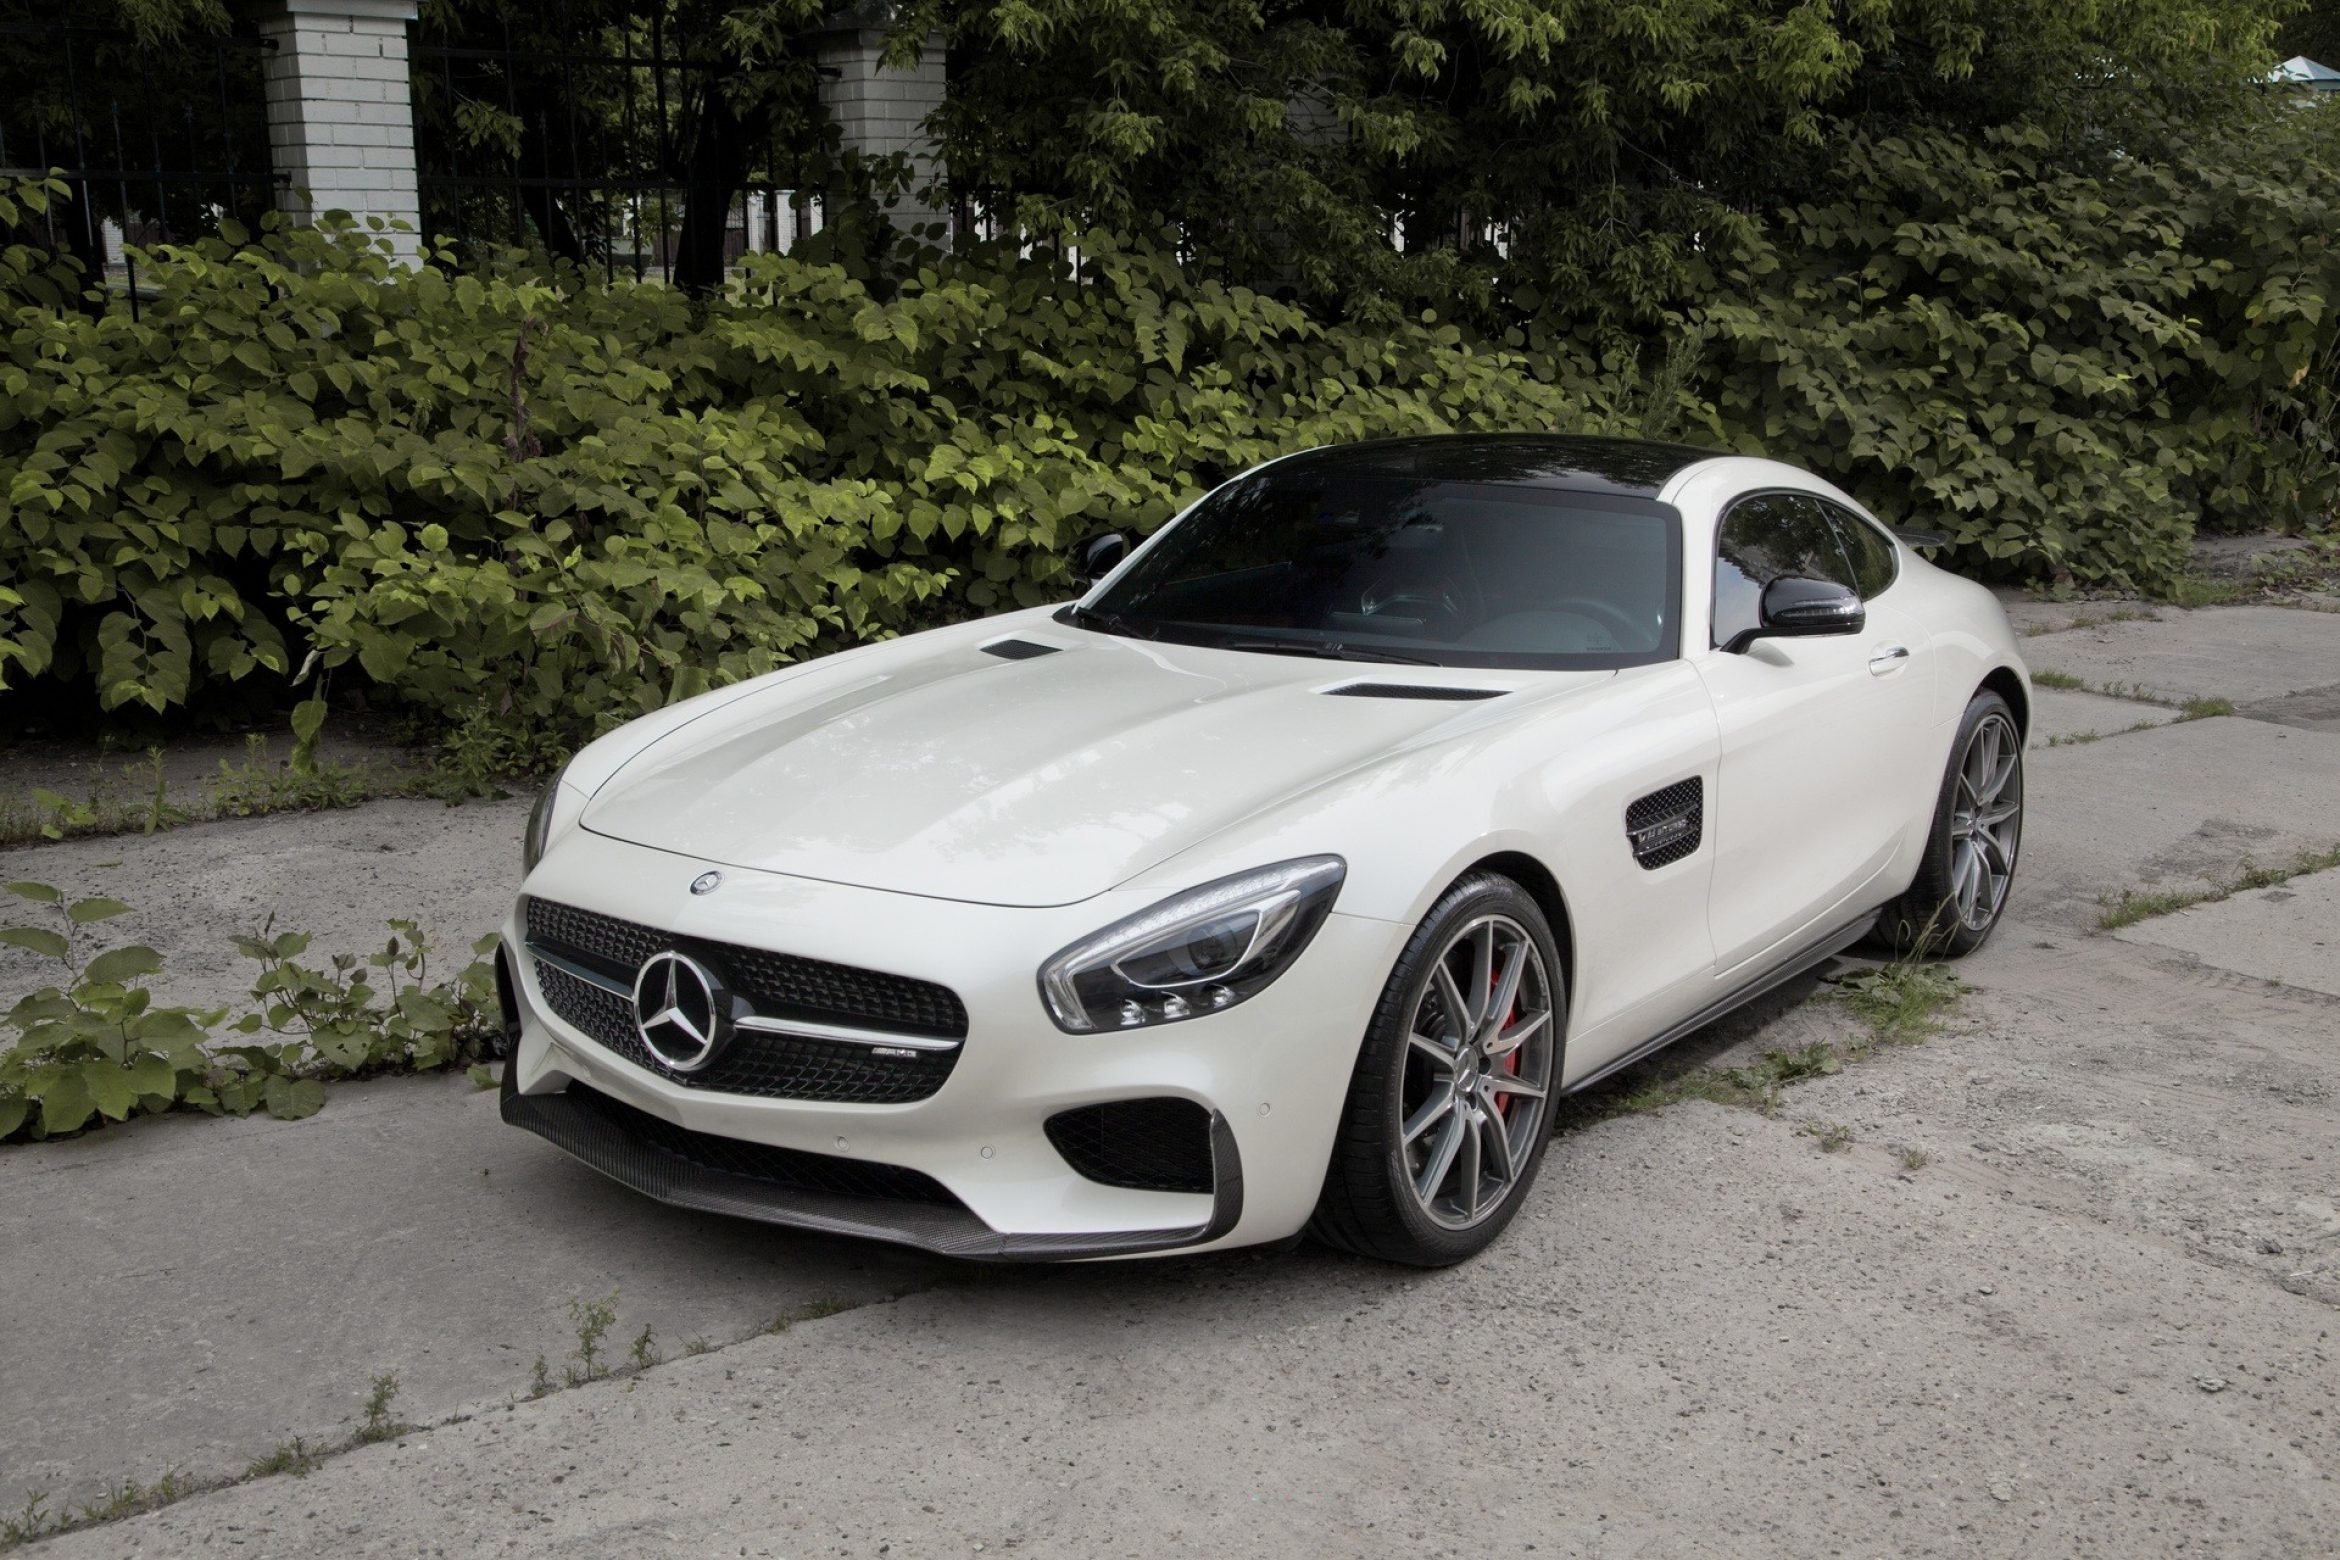 Check our price and buy Carbon Fiber Body kit set for Mercedes AMG GT Coupe!